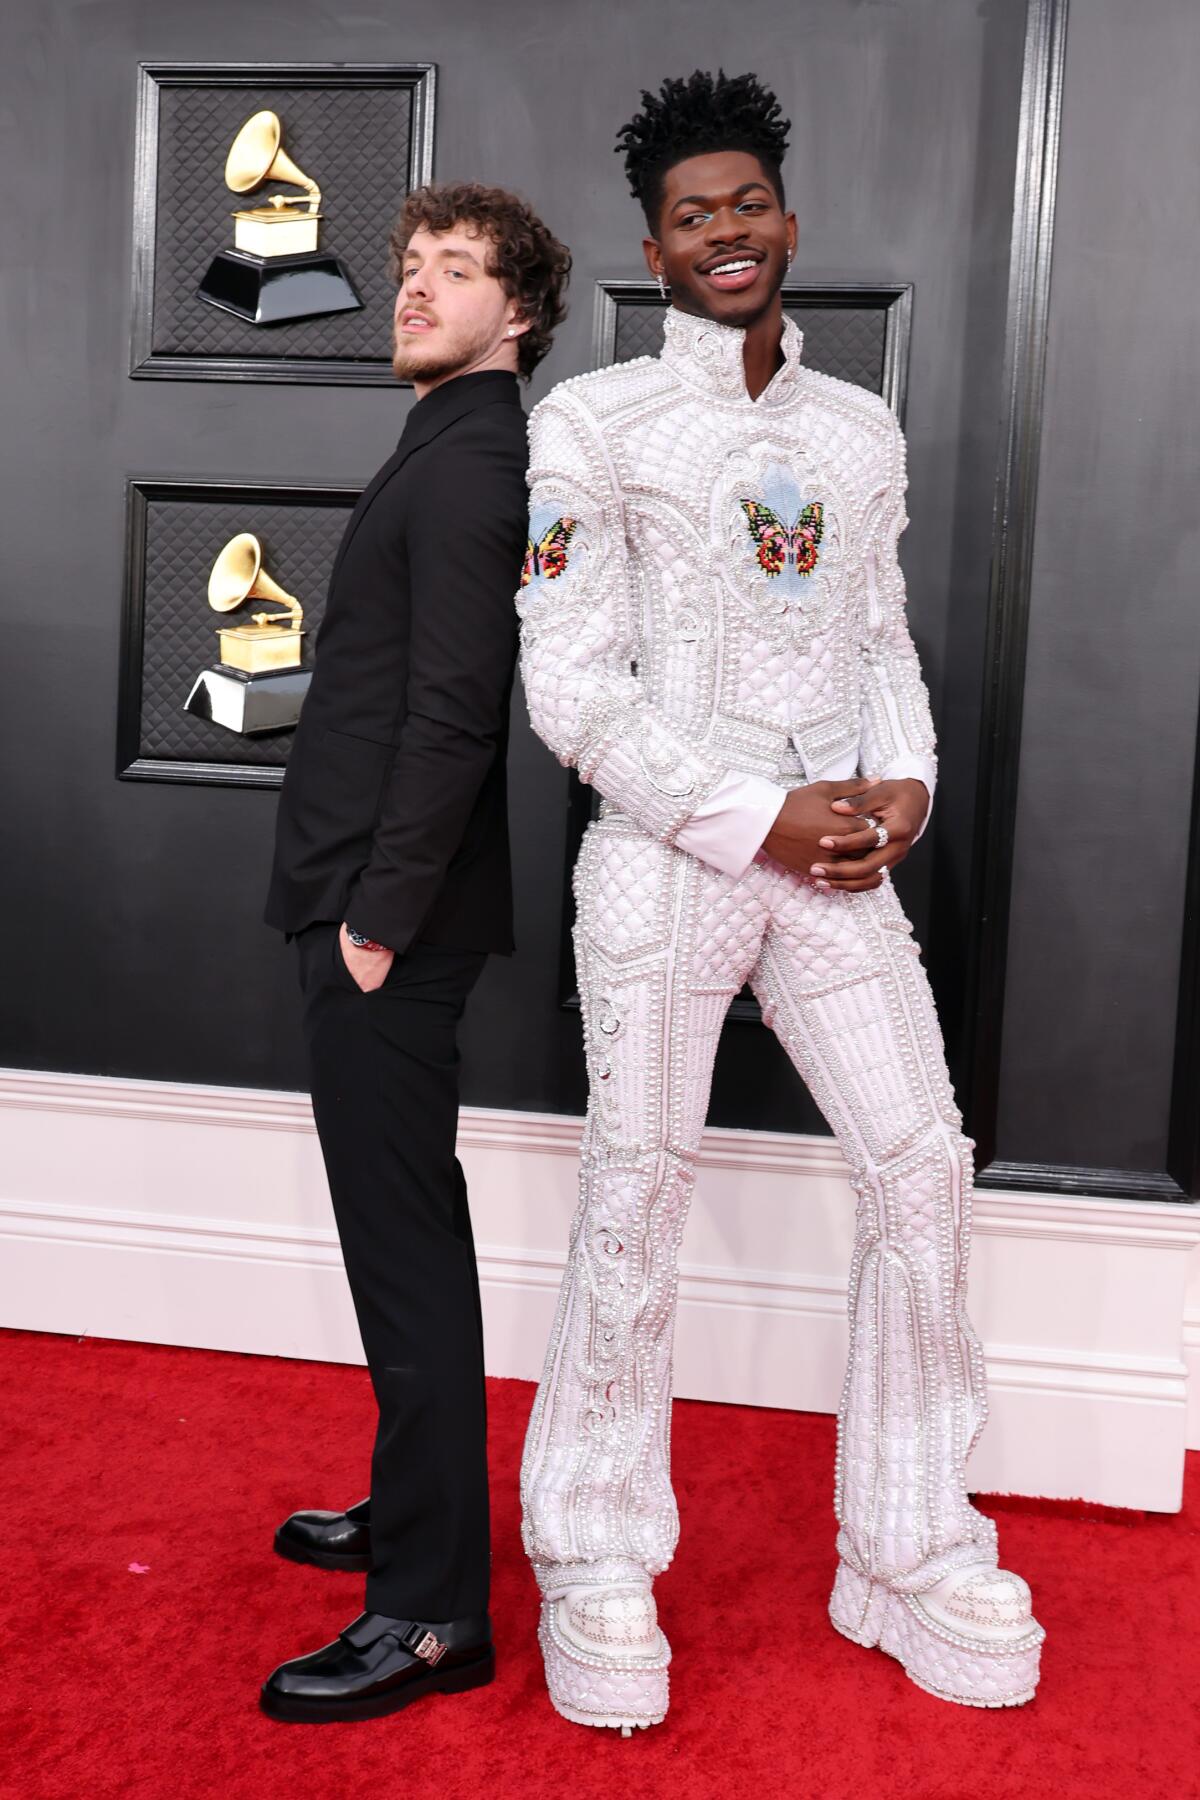 A man in a dark suit and a man in a white one stand back to back on a red carpet